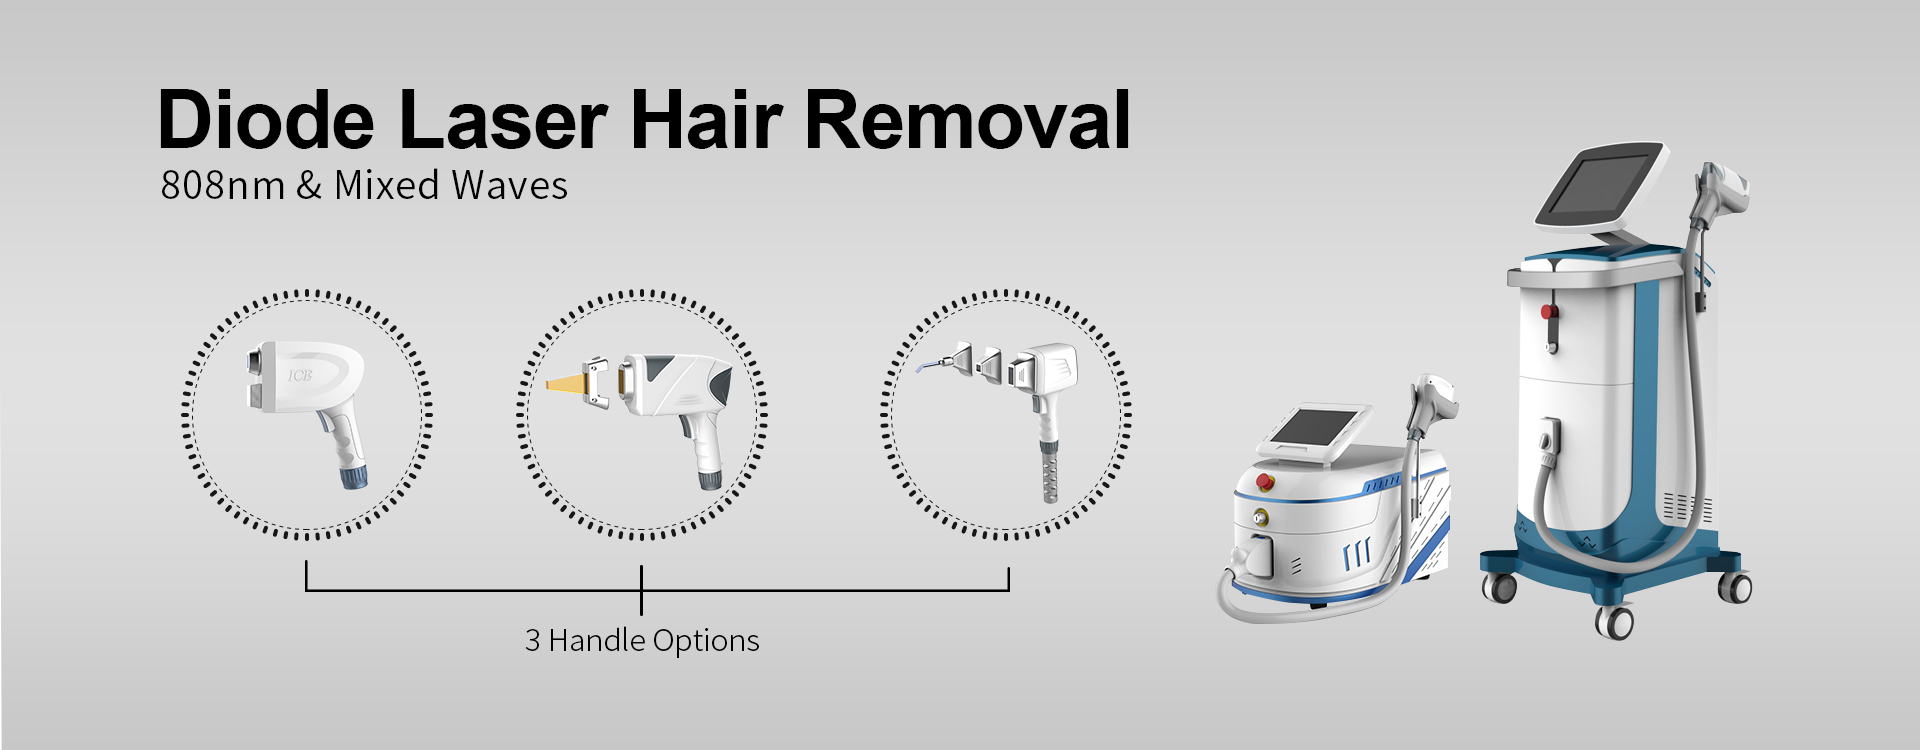 diode laser hair removal 